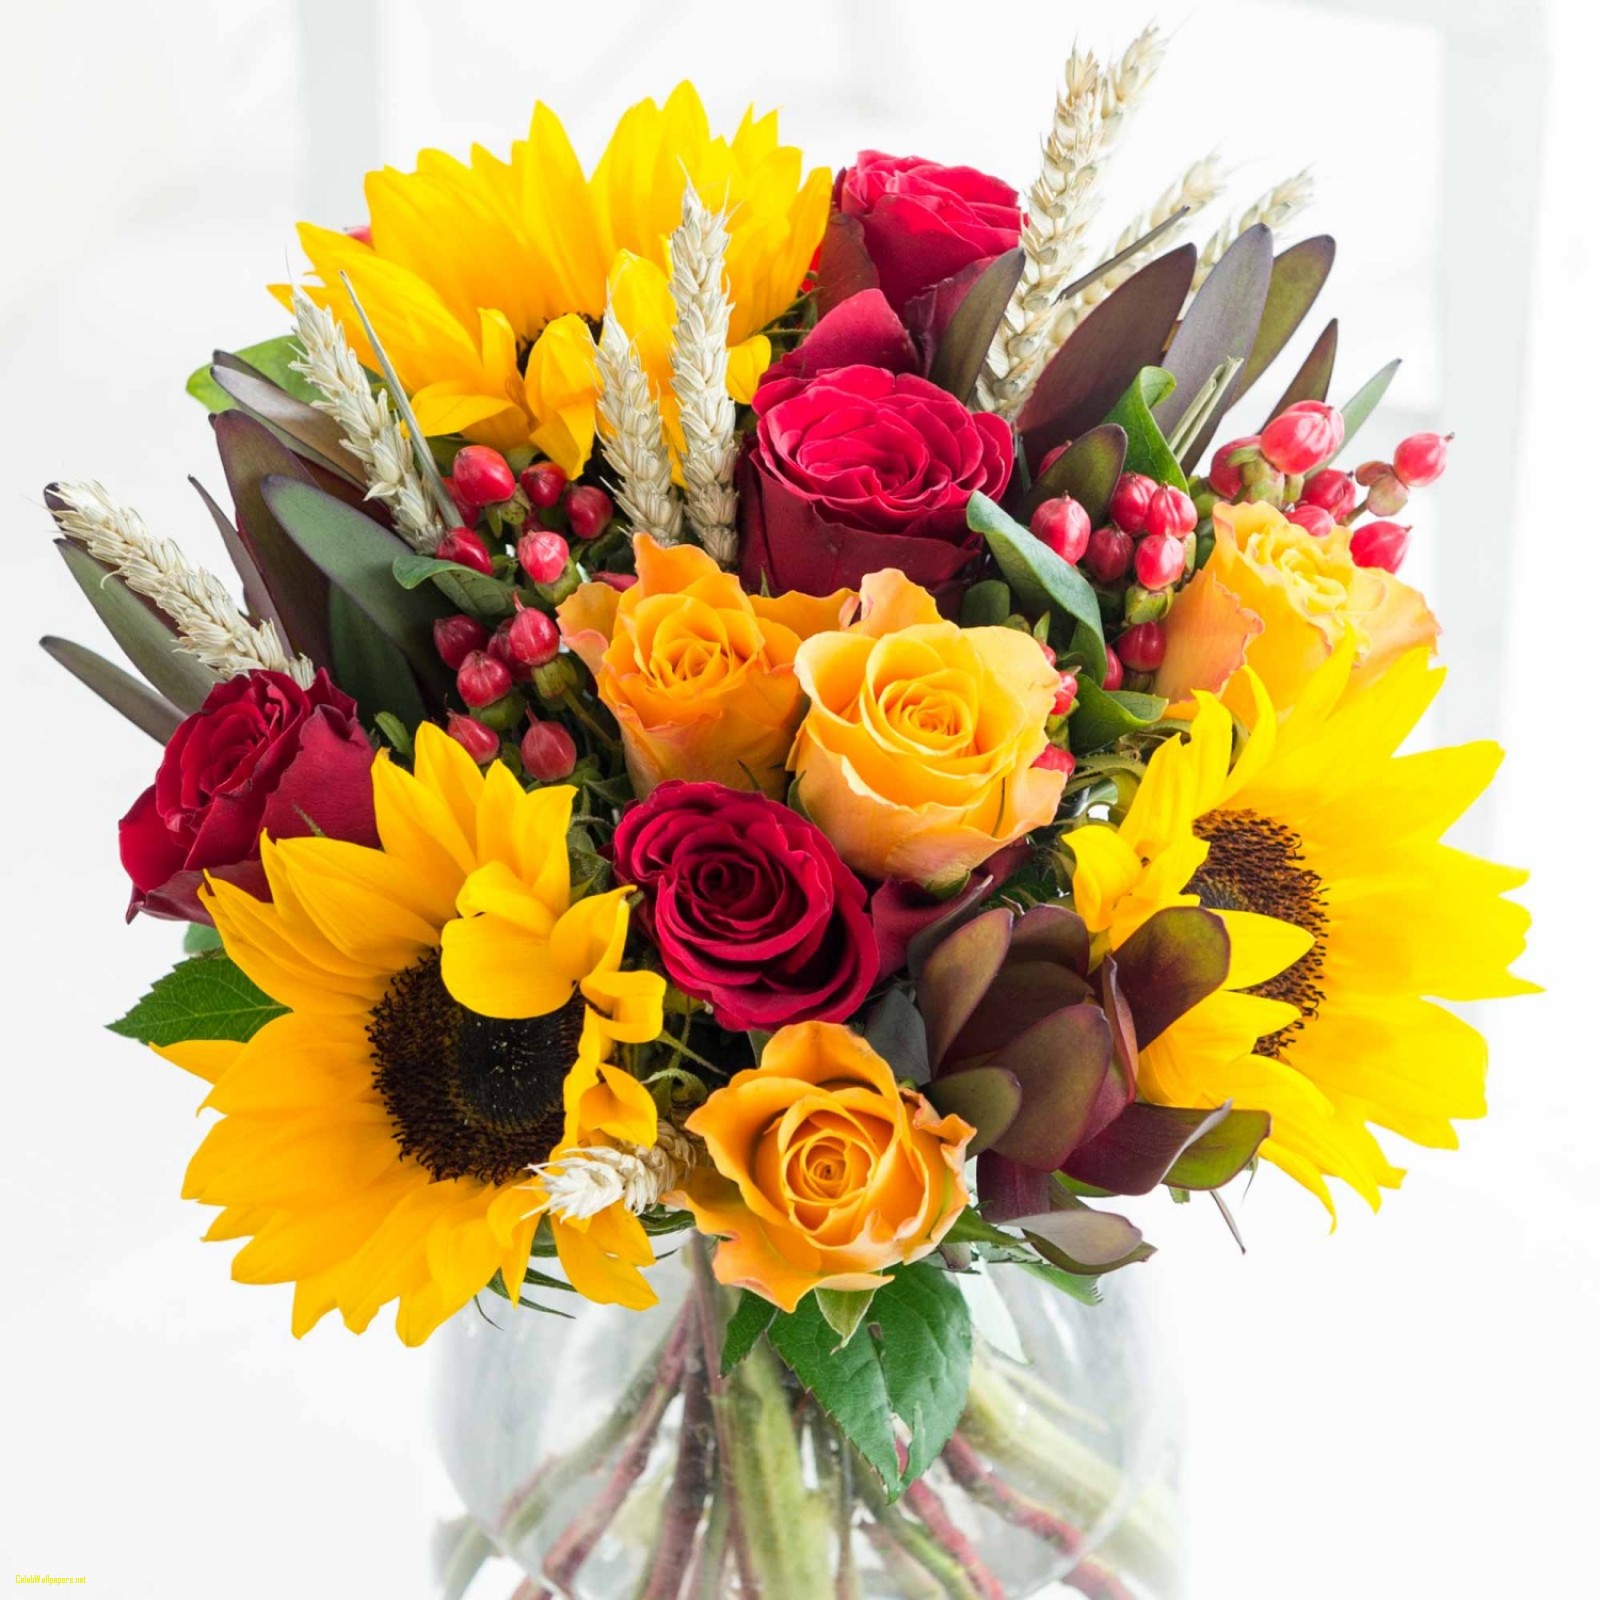 Flower Bouquet Pictures Flowers Flower Bouquets Free Uk Delivery ...